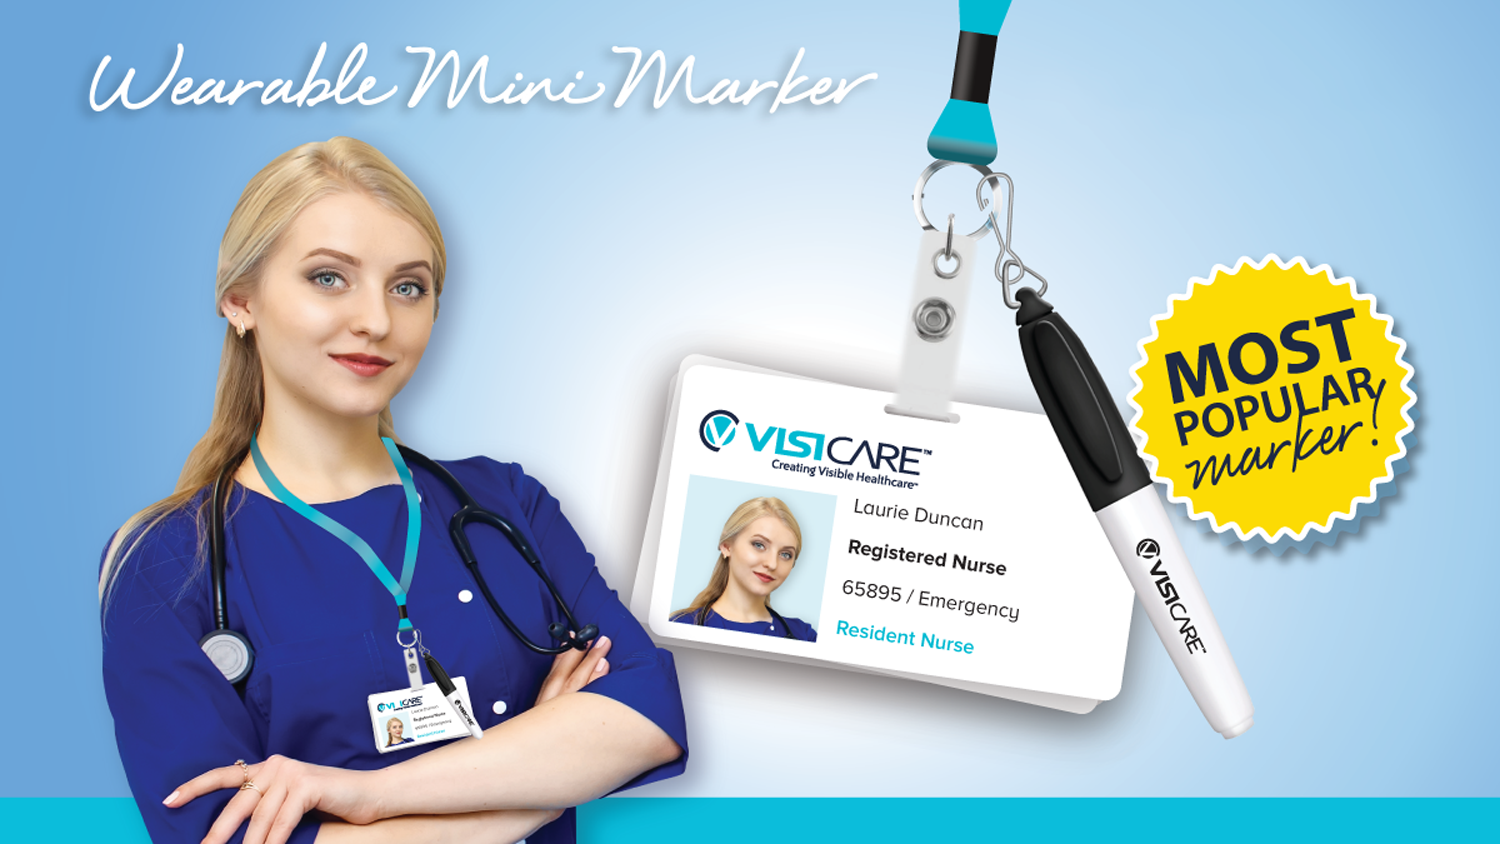 wearable mini marker with clip for nurse badge worn by nurse